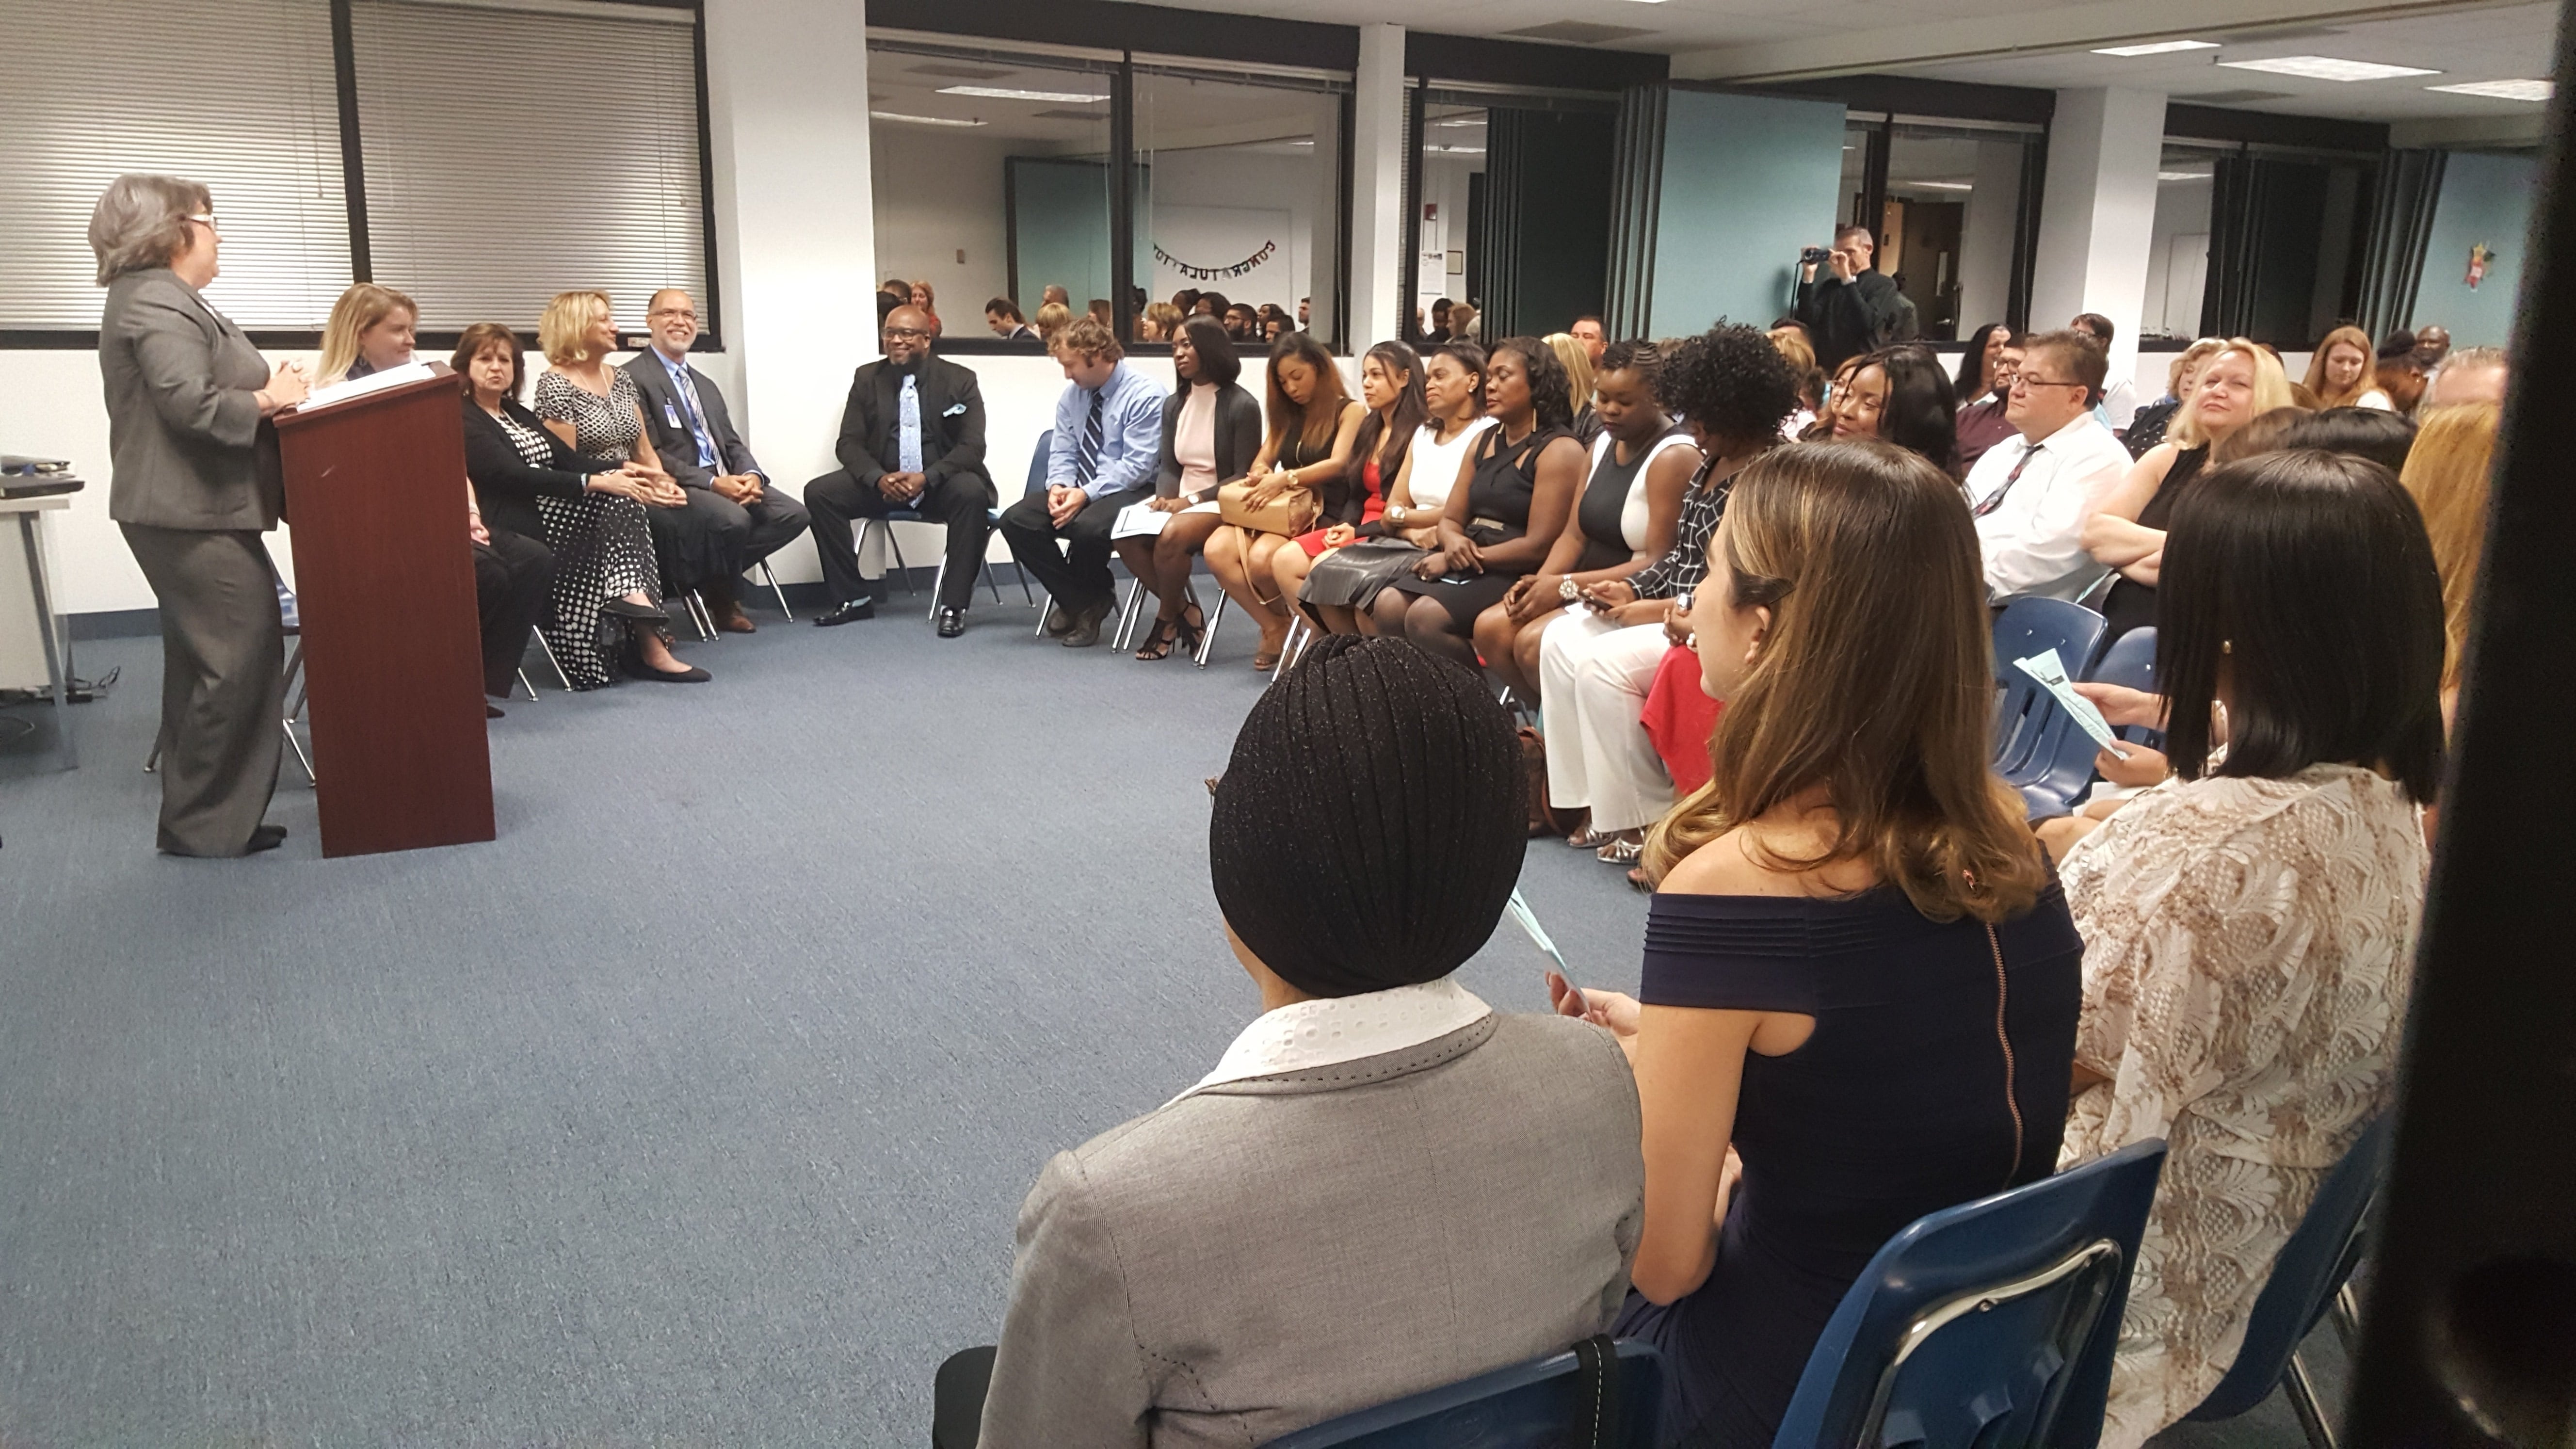 Ft. Lauderdale Holds Pinning Ceremony for OTA Students